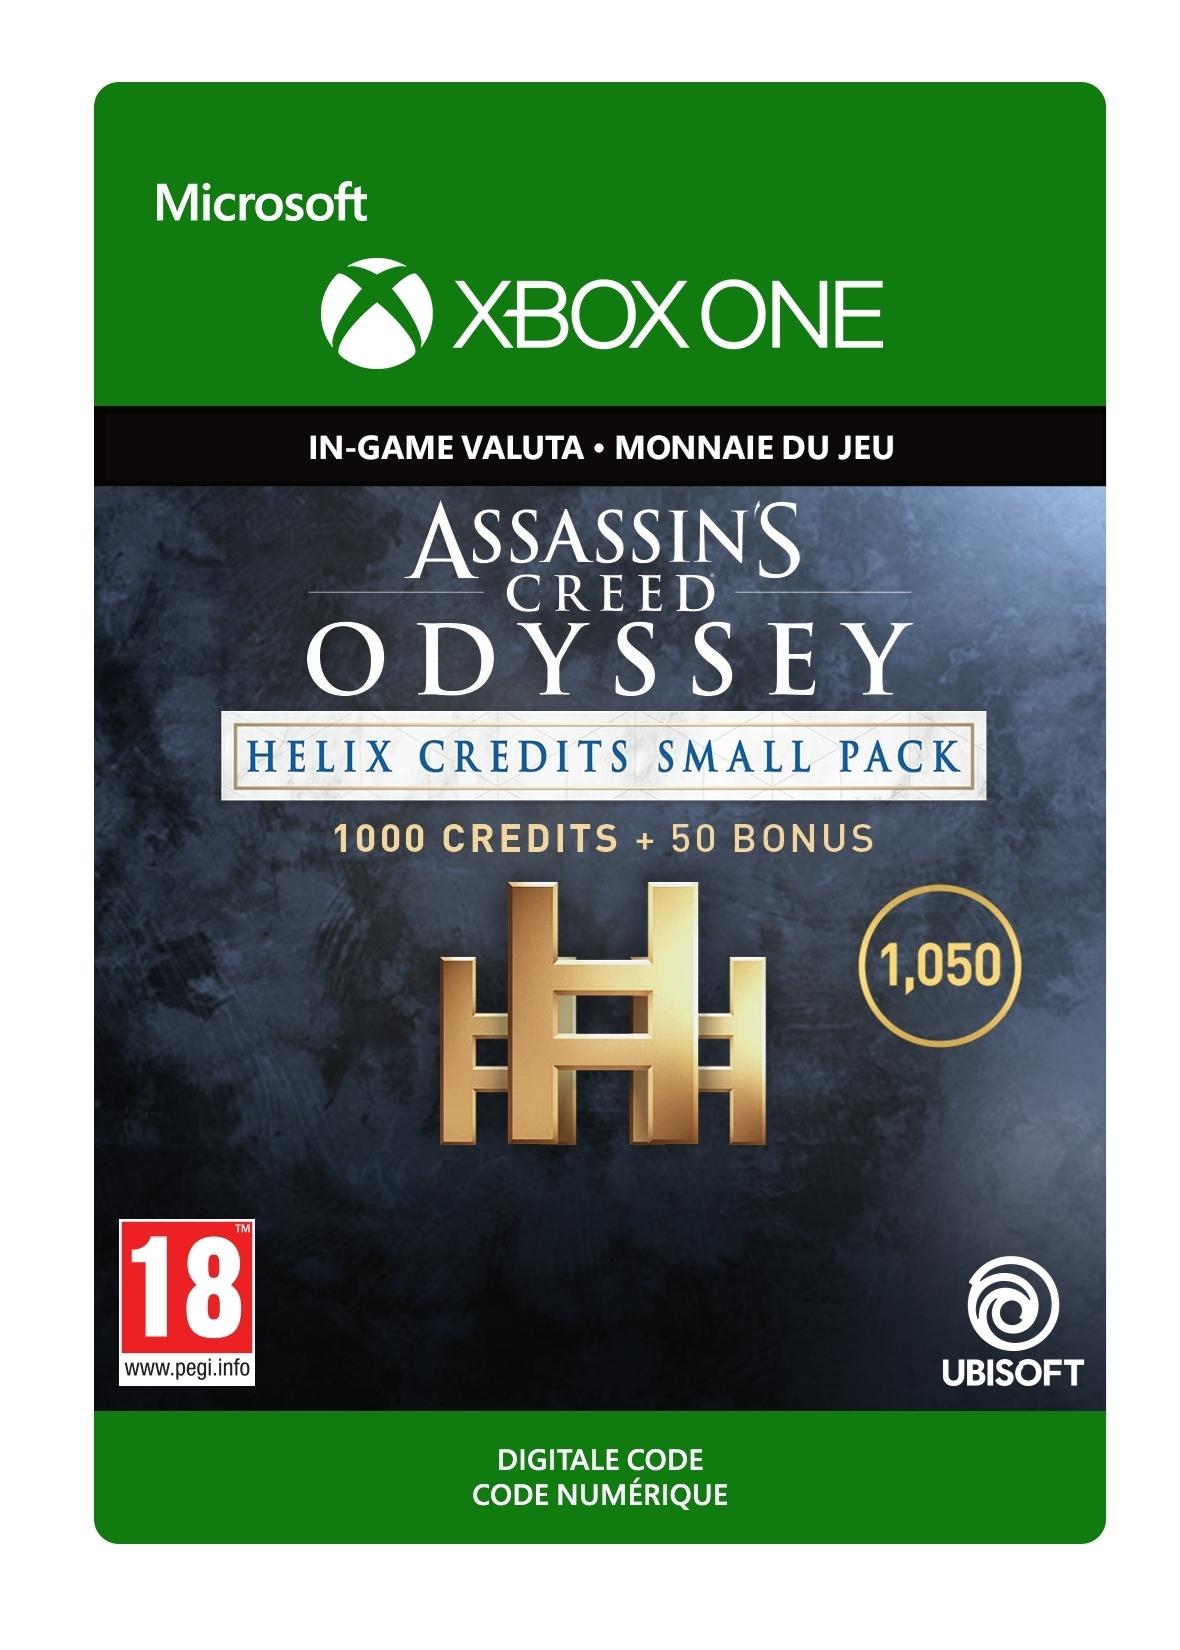 Assassin's Creed Odyssey: Helix Credits Small Pack - Xbox One - Consumable | 7F6-00209 (bda74314-d64b-f546-9ab3-70fab1a05cab)